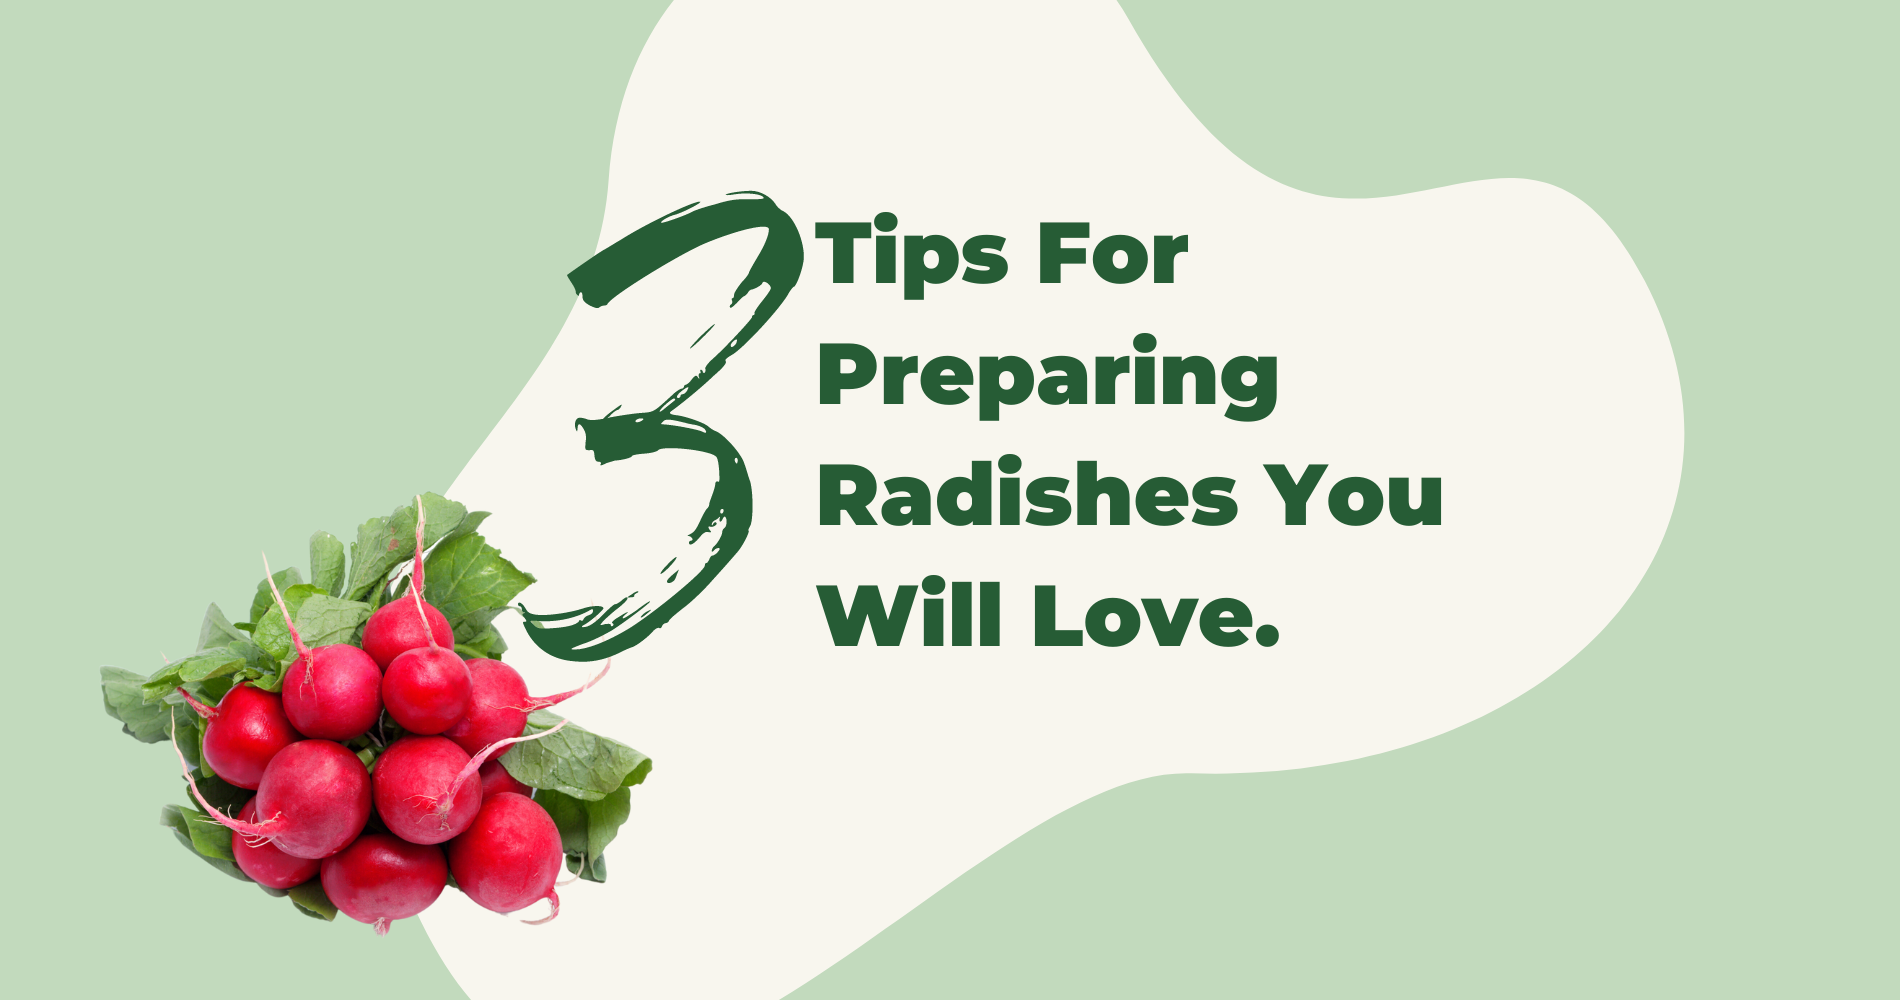 3 Ways to Prepare Radishes You Will Love image